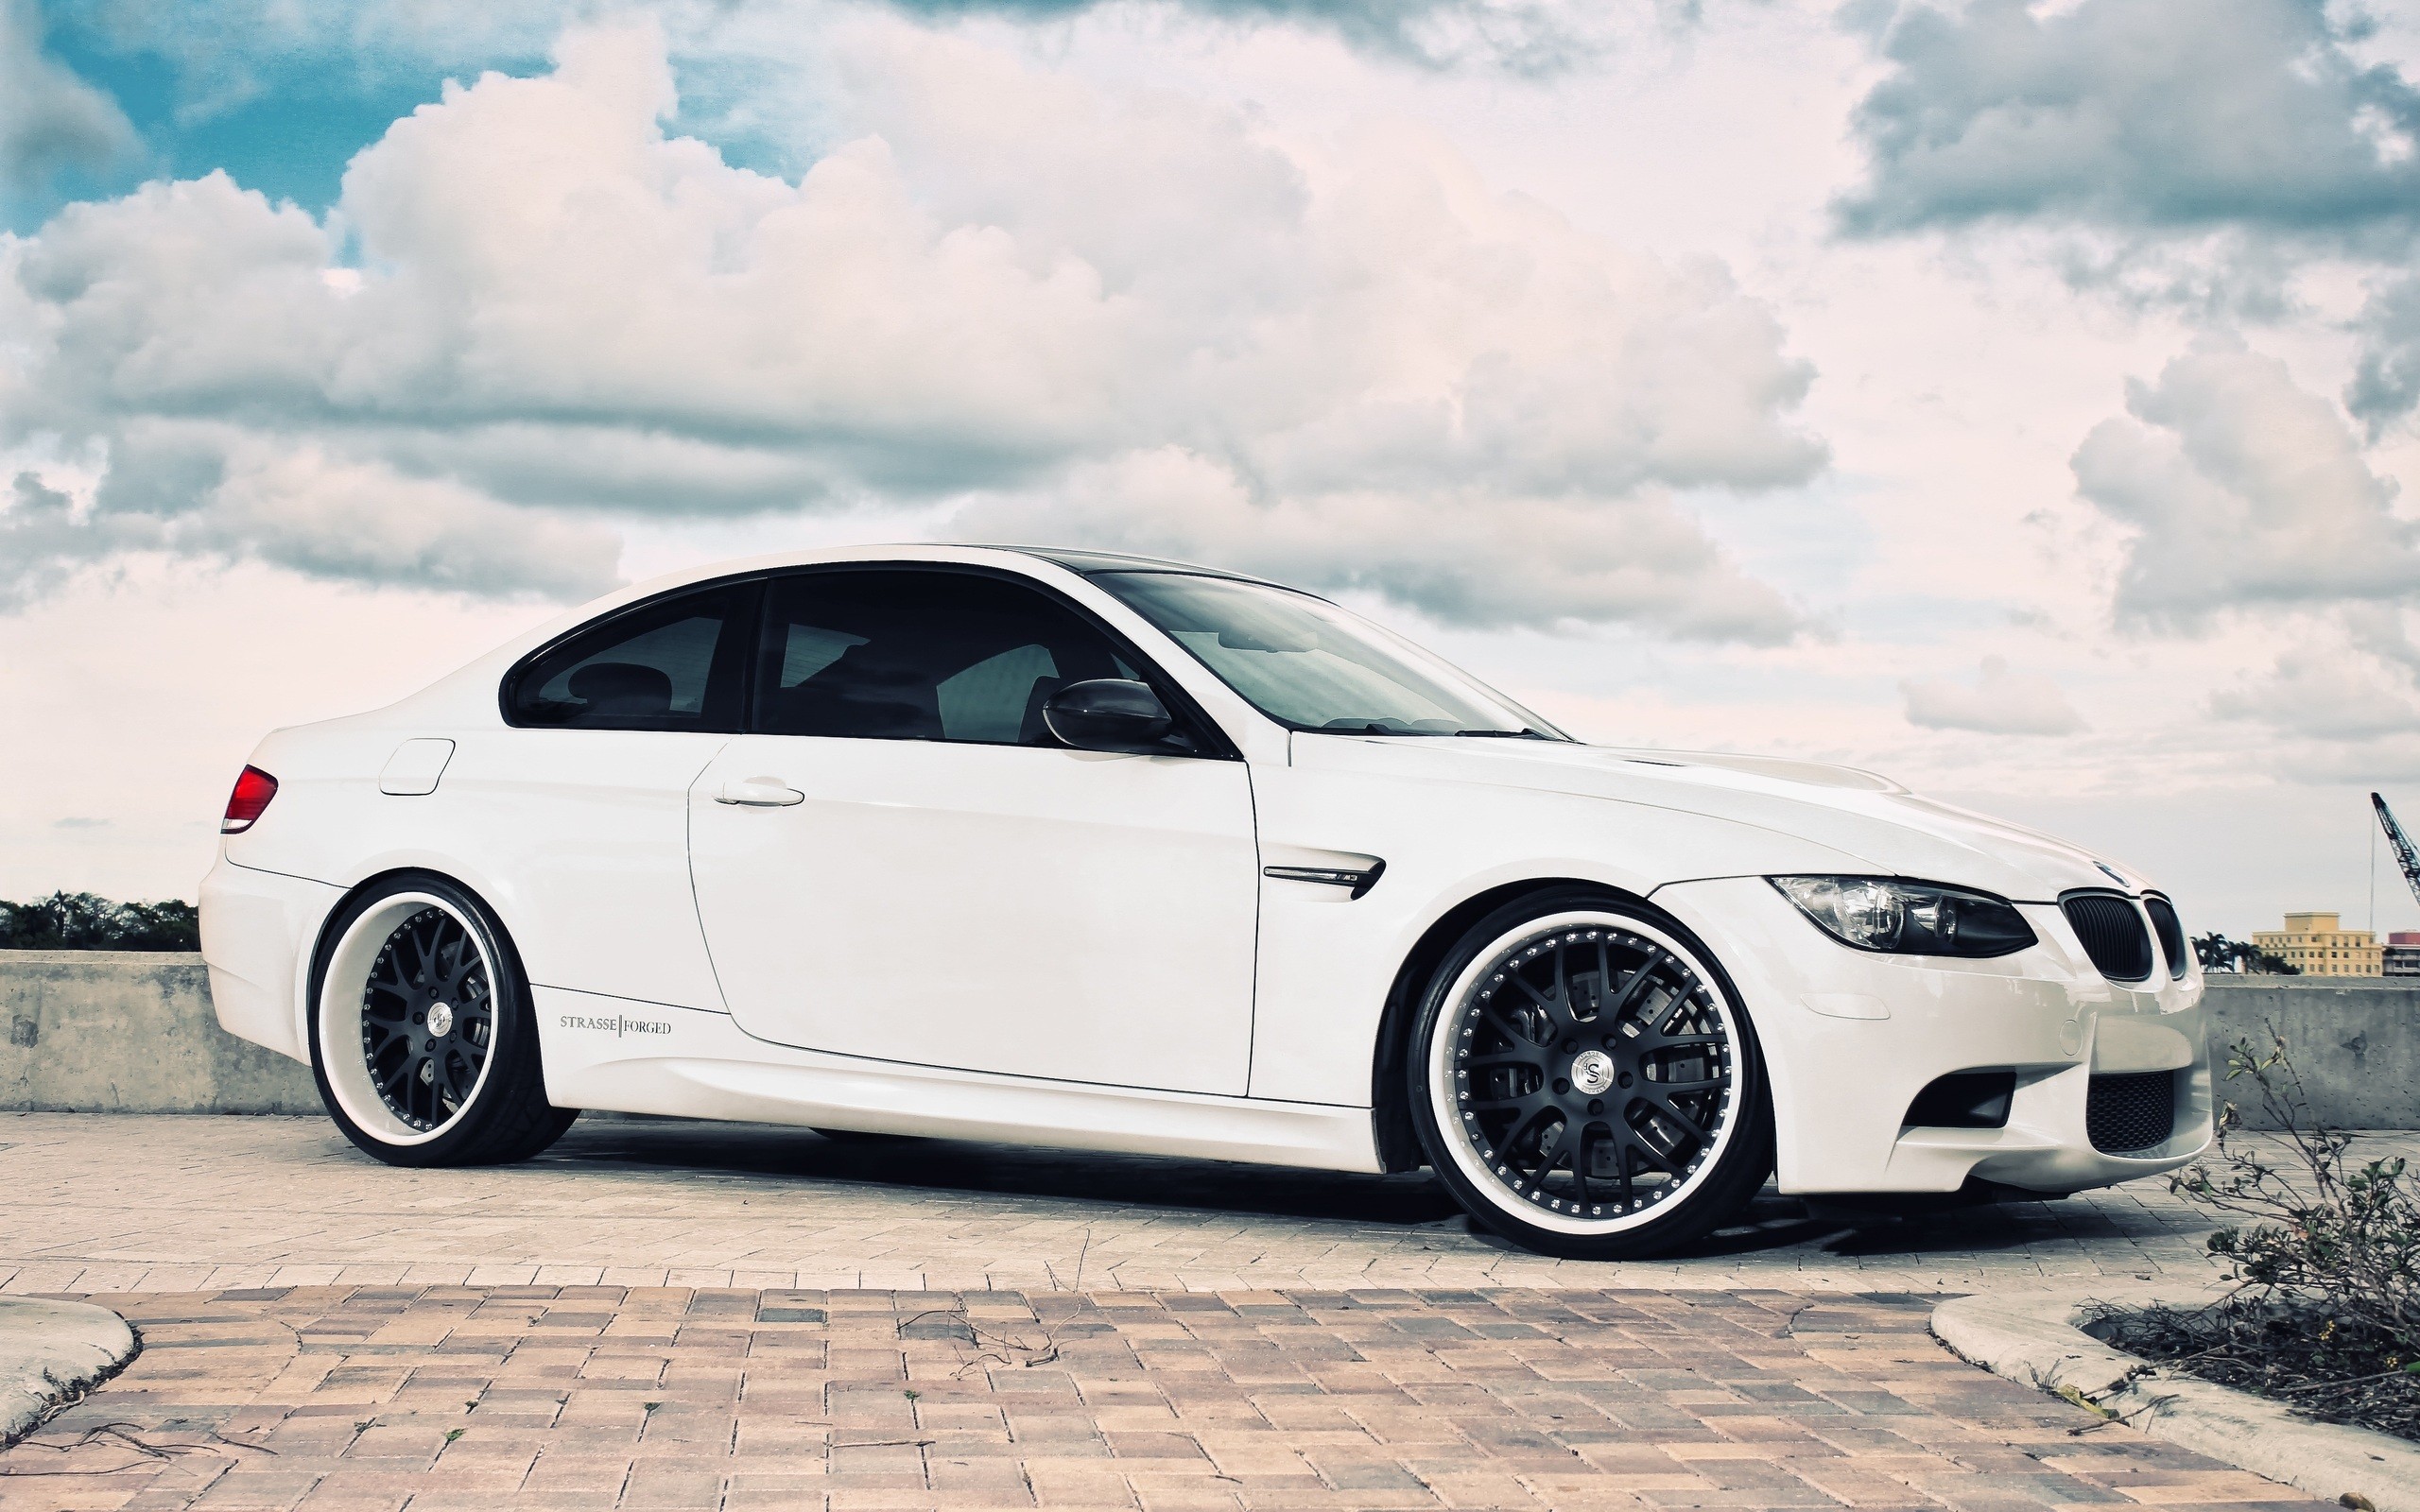 white, Cars, Engines, Vehicles, Supercars, Tuning, Wheels, Bmw, M3, Sports, Cars, Luxury, Sport, Cars, Speed, Automobiles Wallpaper